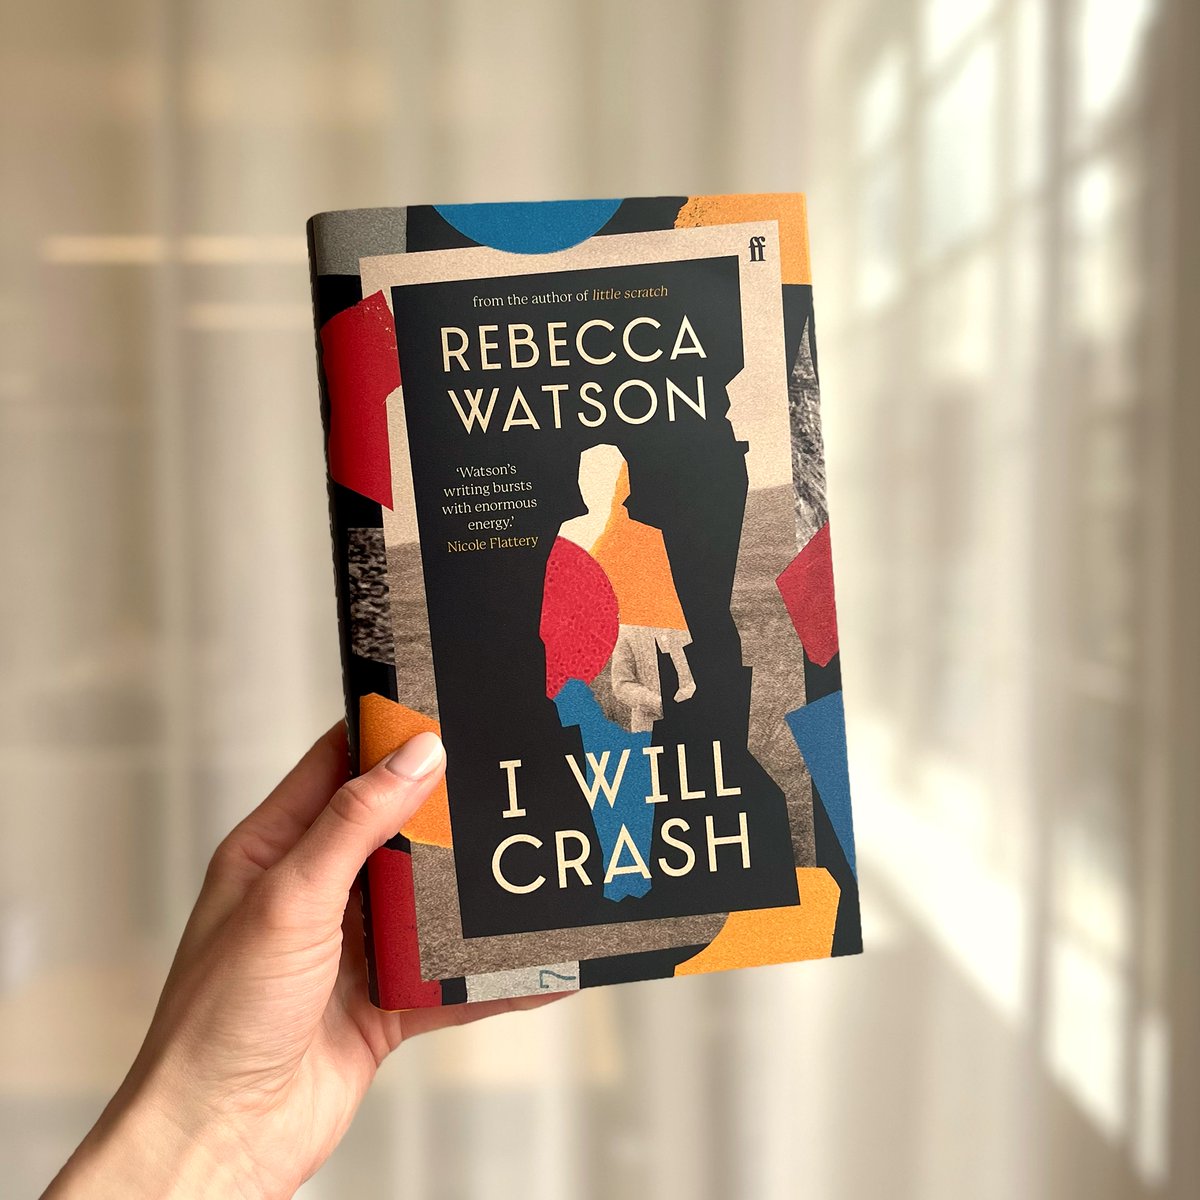 'Rebecca Watson’s unique style is completely immersive; I felt as though I was inside of Rosa’s head, spiralling with her into uncertain memories. I Will Crash is an unforgettable ghost story.' Natasha Brown Finished copies just in of @rebeccawhatsun's new novel, I Will Crash 👀